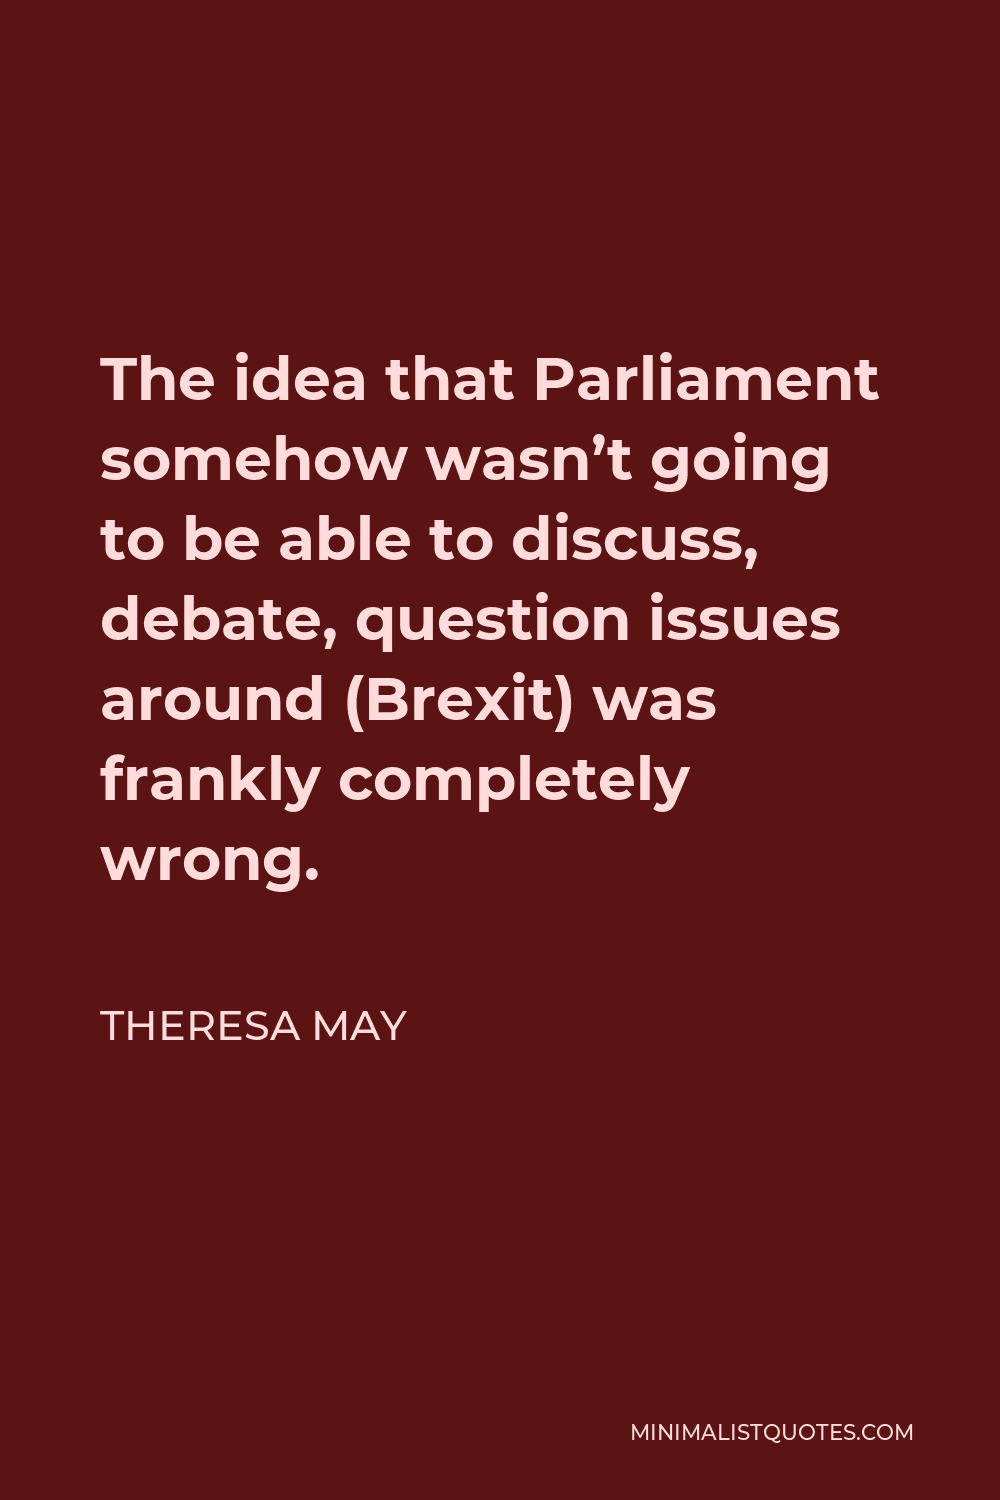 Theresa May Quote - The idea that Parliament somehow wasn’t going to be able to discuss, debate, question issues around (Brexit) was frankly completely wrong.